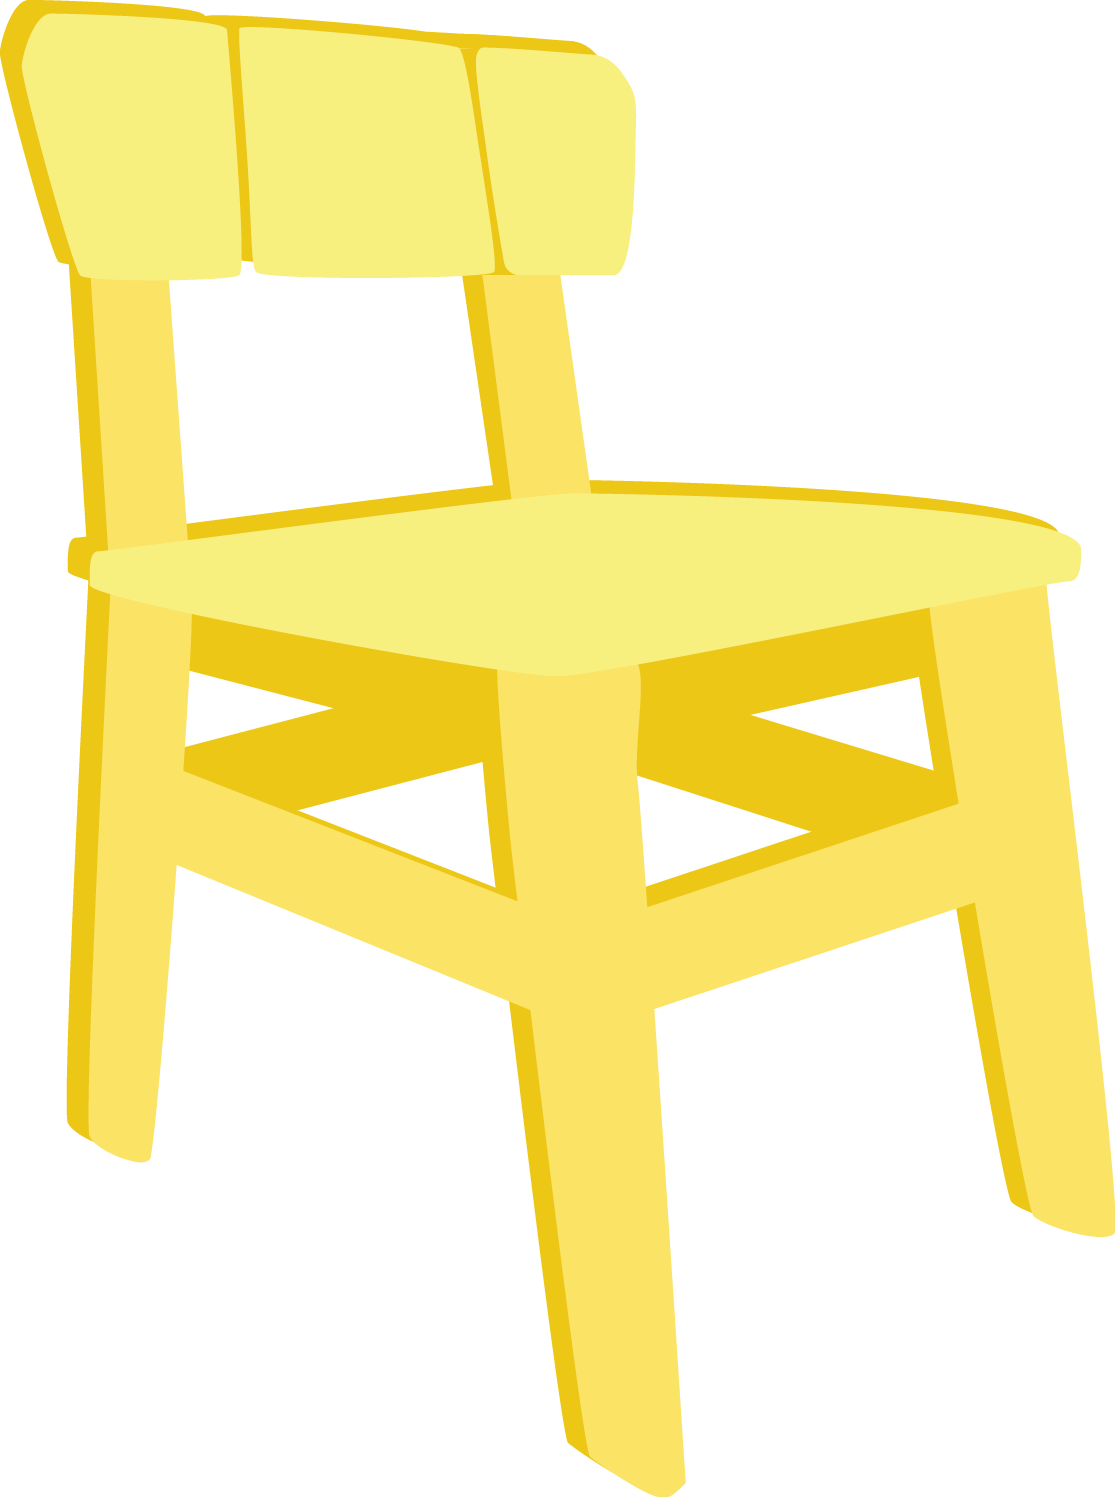 Physical Product Design, Which Is Related To But Not - Chair (1115x1497)